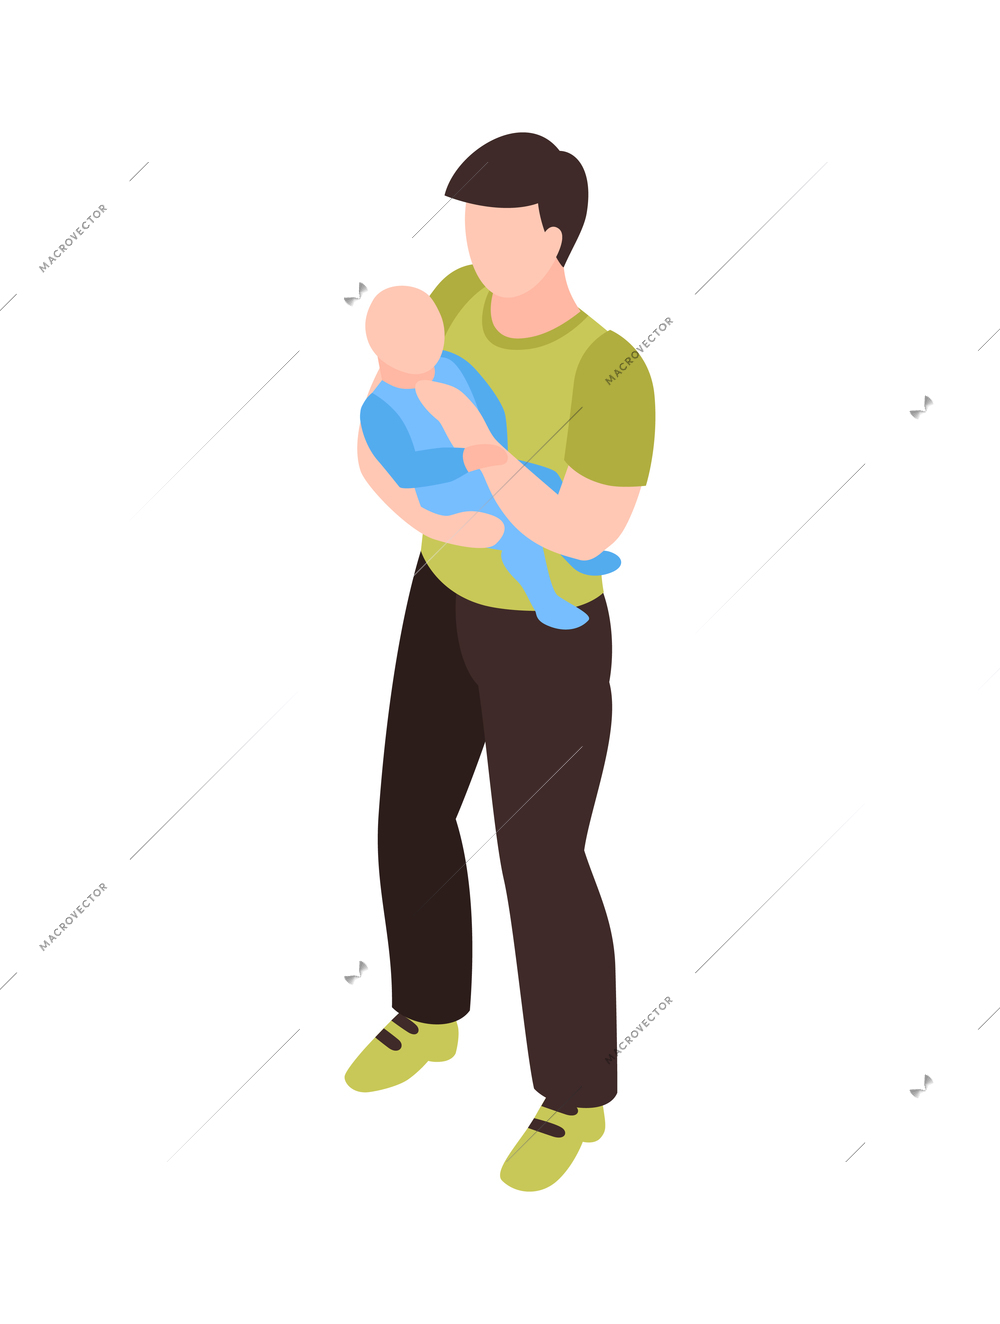 Isometric dad father parenthood children composition with man holding baby in his arms vector illustration